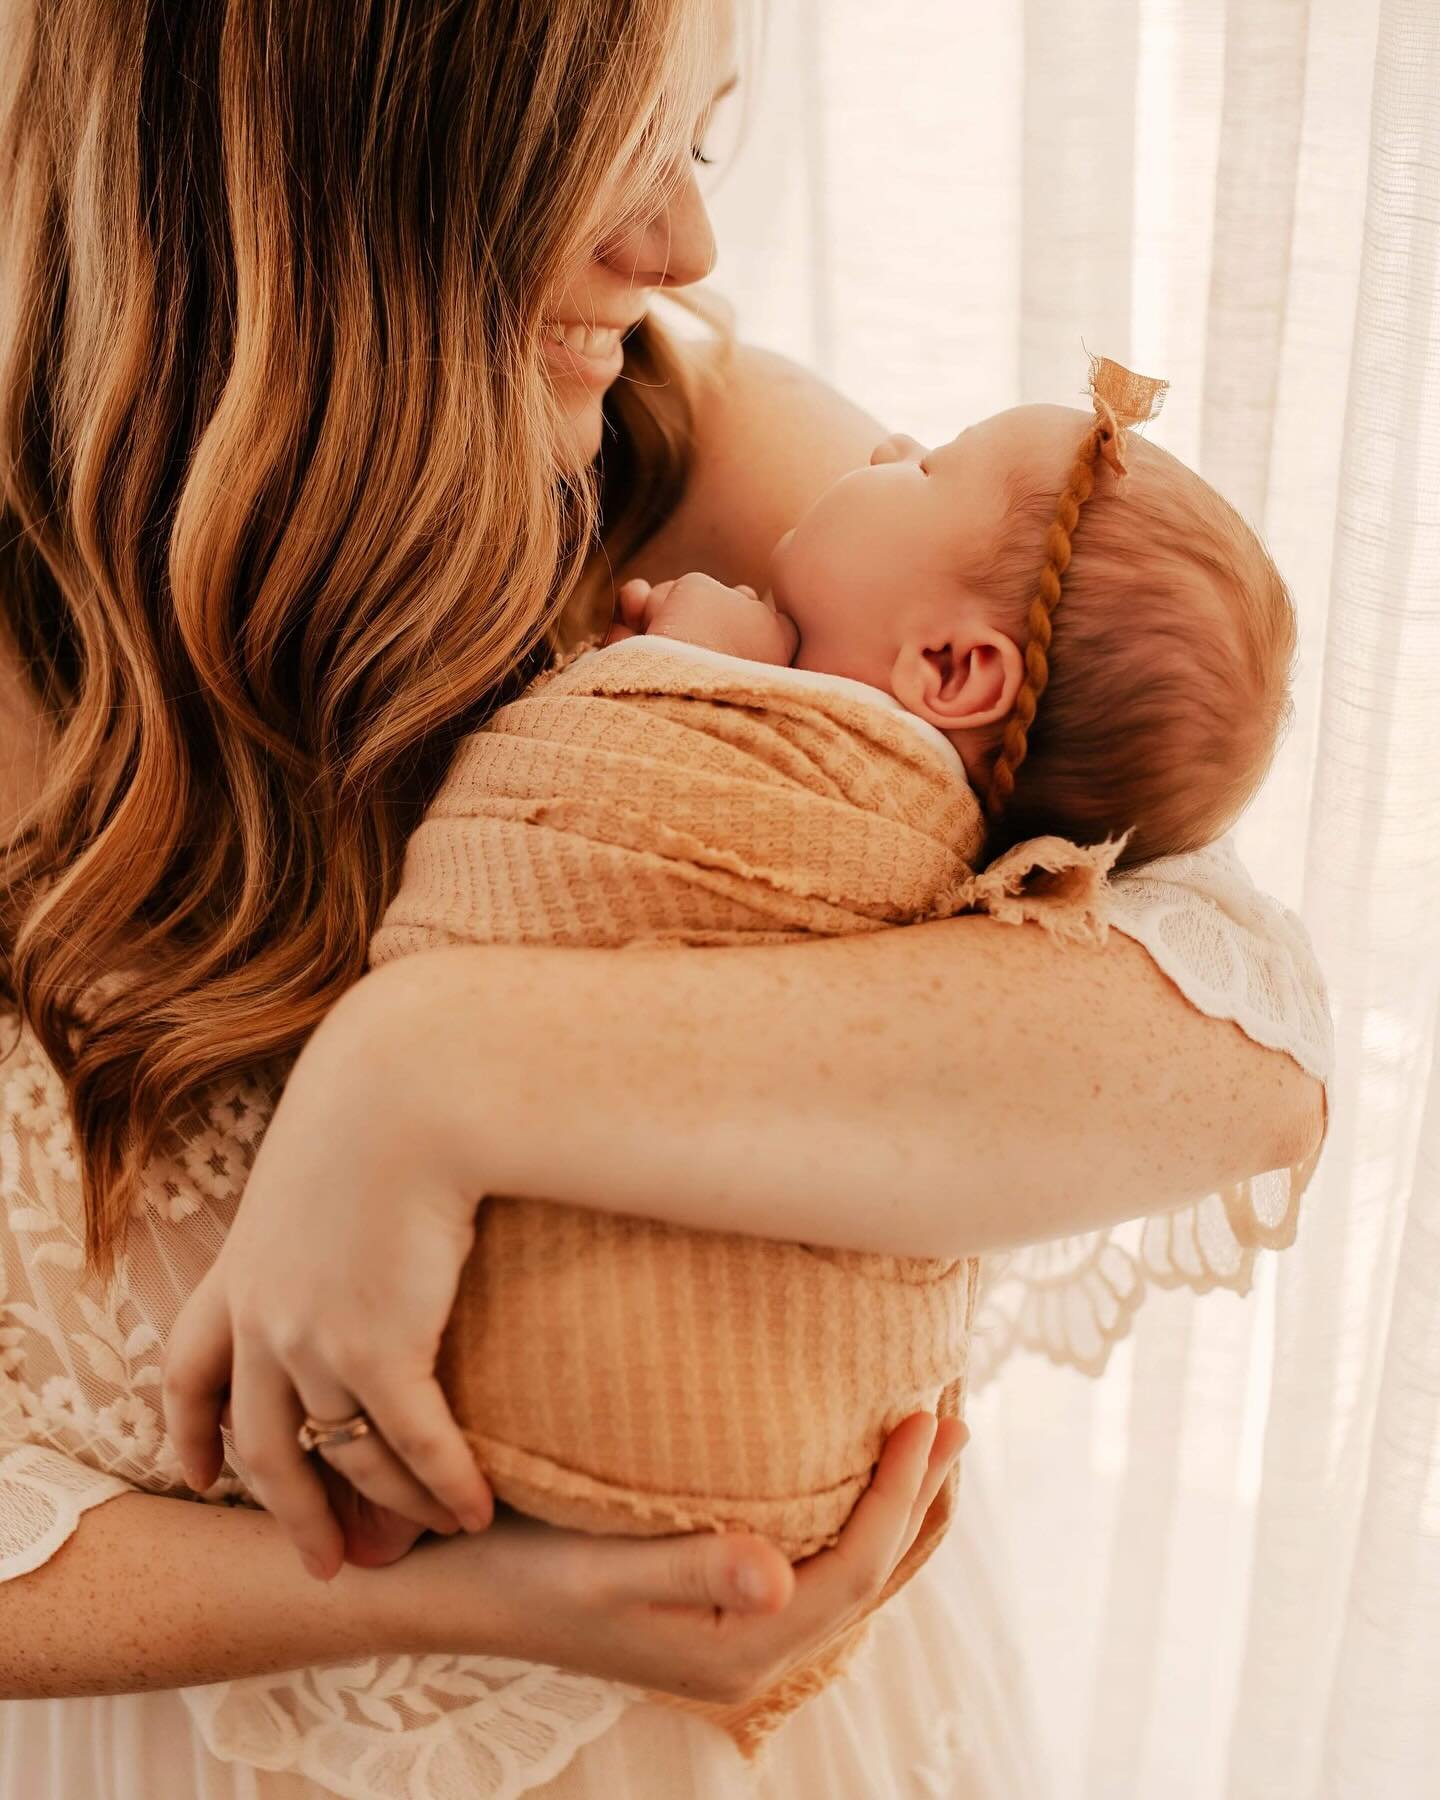 5 essential things to do before you bring your bundle of joy home from the hospital:

1.Set up a cozy crib or bassinet beside your bed: Create a safe and comforting sleeping space for your newborn within arm&rsquo;s reach. Having your baby close by c